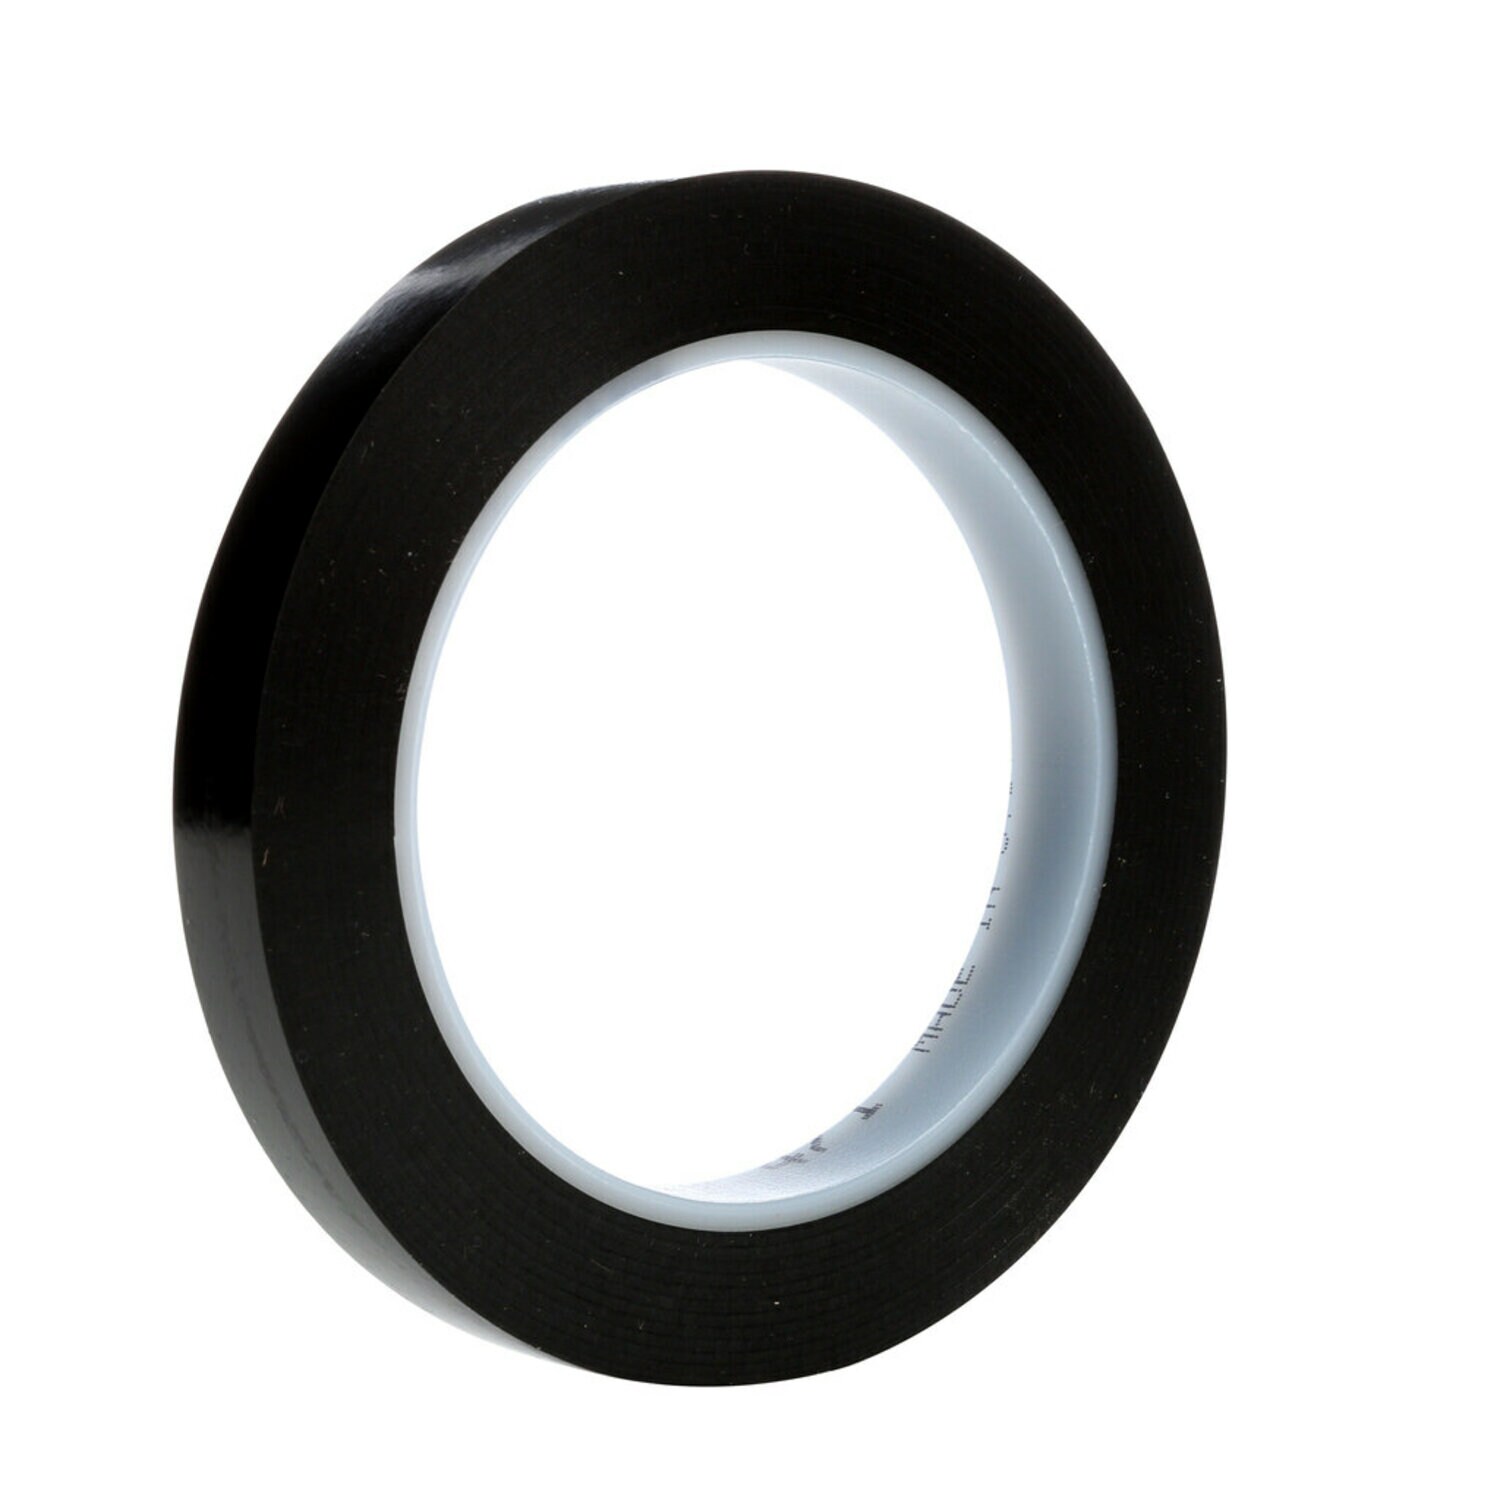 7100044629 - 3M Vinyl Tape 471, Black, 1/2 in x 36 yd, 5.2 mil, 72 rolls per case,
Individually Wrapped Conveniently Packaged